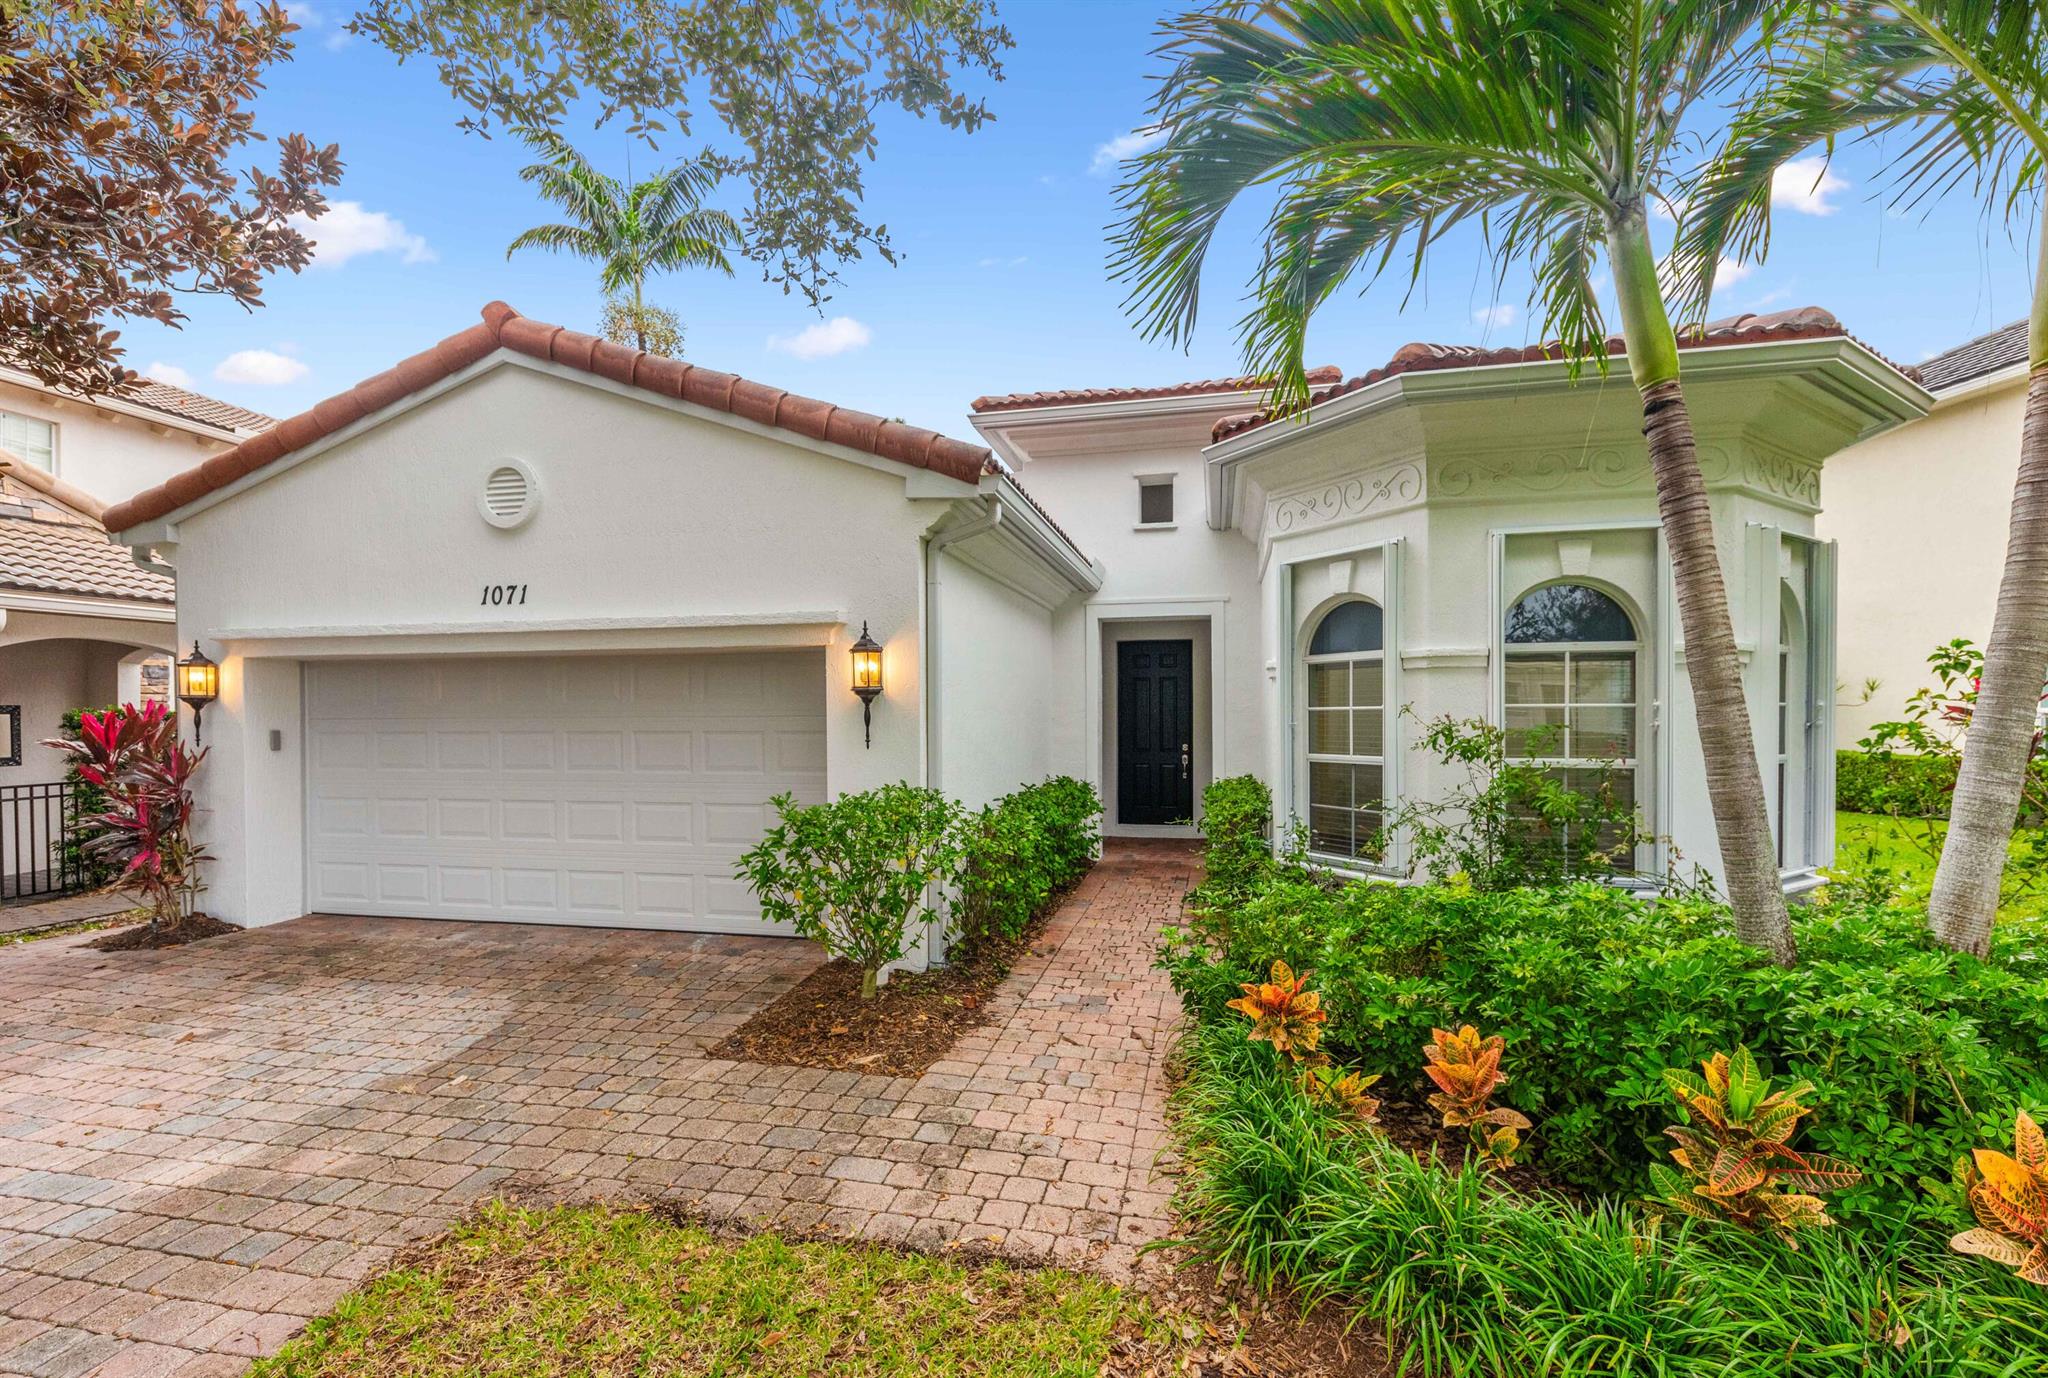 This renovated single-story home in Evergrene, Palm Beach Gardens offers comfortable living with its spacious layout. It features 2 bedrooms, 1 den that could be converted to another bedroom and 2 bathrooms, providing ample space for your needs. The home boasts a large private backyard with a lush landscape setting and a covered lanai, perfect for enjoying the outdoors. Don't miss the opportunity to make this your dream home in a desirable location. The open floor plan with volume ceilings creates a great sense of space. The kitchen has been beautifully transformed with newer stainless steel double oven, warming oven, and gas cooktop. The addition of beautiful new quartz countertops, a designer backsplash, and a new sink and faucet adds a touch of elegance to the space.  See Supplement The professional sprayed white and gray wood cabinets with soft close further enhance the kitchen's style. The exterior of the home has been freshly painted, giving it a fresh and inviting look. Inside, you'll find beautiful wood flooring and tile throughout, with no carpeting. The California closets provide ample storage space. The AC and hot water heater of this home were replaced within the last 2-3 years.  The Master Bath and secondary baths have been remodeled and are gorgious.

The home also offers plenty of natural light, functionality, and style. These are just a few of the many features that make this home truly exceptional.

Evergrene is renowned for its resort-style amenities, offering a pool, fitness center, weight room, Tiki Bar, splash park, and various recreational activities such as fishing at Lake Dorothy pier and pickleball. The community is also located in close proximity to beautiful Juno Beach, fine dining, entertainment options, and premier shopping destinations, enhancing the appeal of this exceptional property.

No detail has been spared in the meticulous updates throughout the home, making it move-in ready for its new owner. Schedule a private showing today and seize the opportunity to experience a lifestyle of comfort and convenience in this meticulously crafted residence.